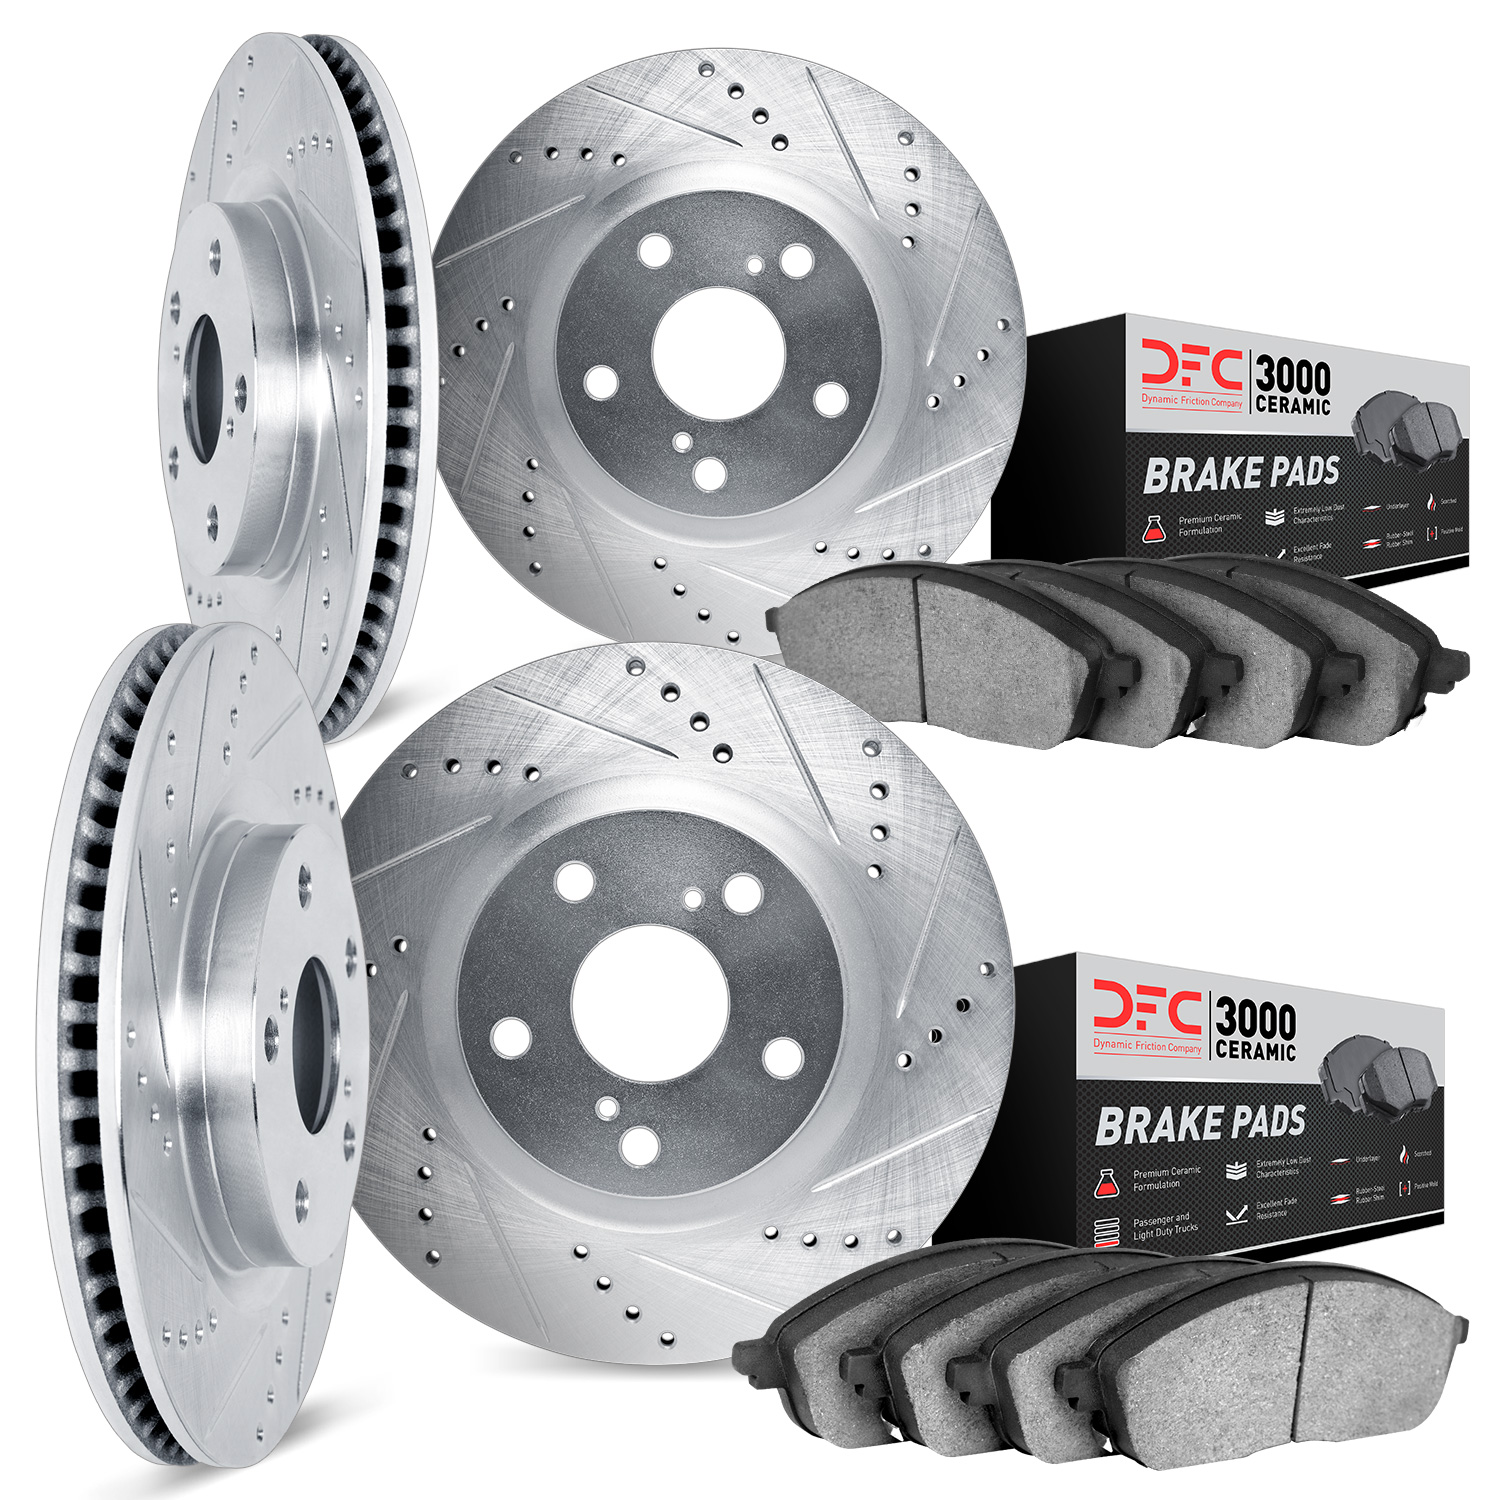 7304-54117 Drilled/Slotted Brake Rotor with 3000-Series Ceramic Brake Pads Kit [Silver], 2015-2020 Ford/Lincoln/Mercury/Mazda, P